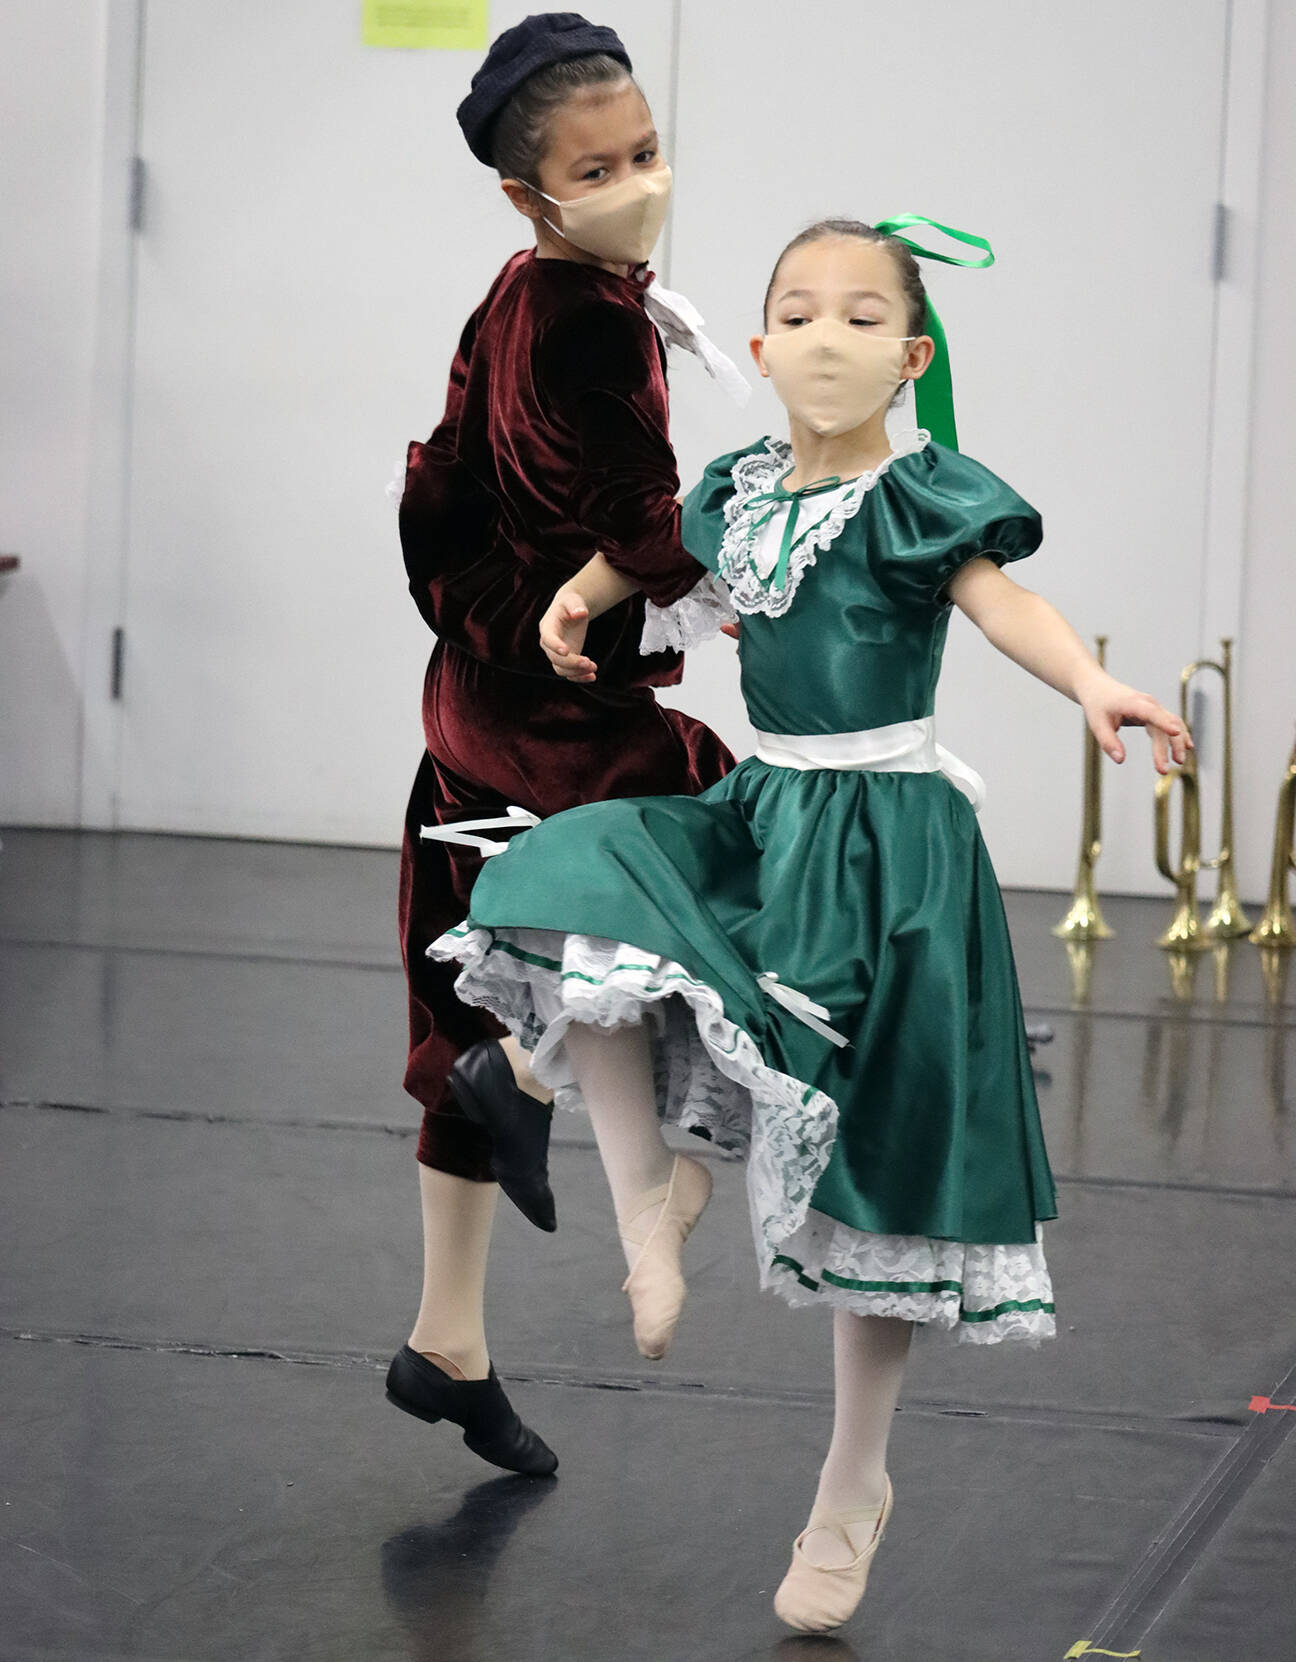 Brigitte Ouellette rehearses the role of Fritz along with Sachiko Marks, who is portraying a party goer in “The Nutcracker” rehearsal on Saturday, Nov. 27. (Ben Hohenstatt/Juneau Empire)